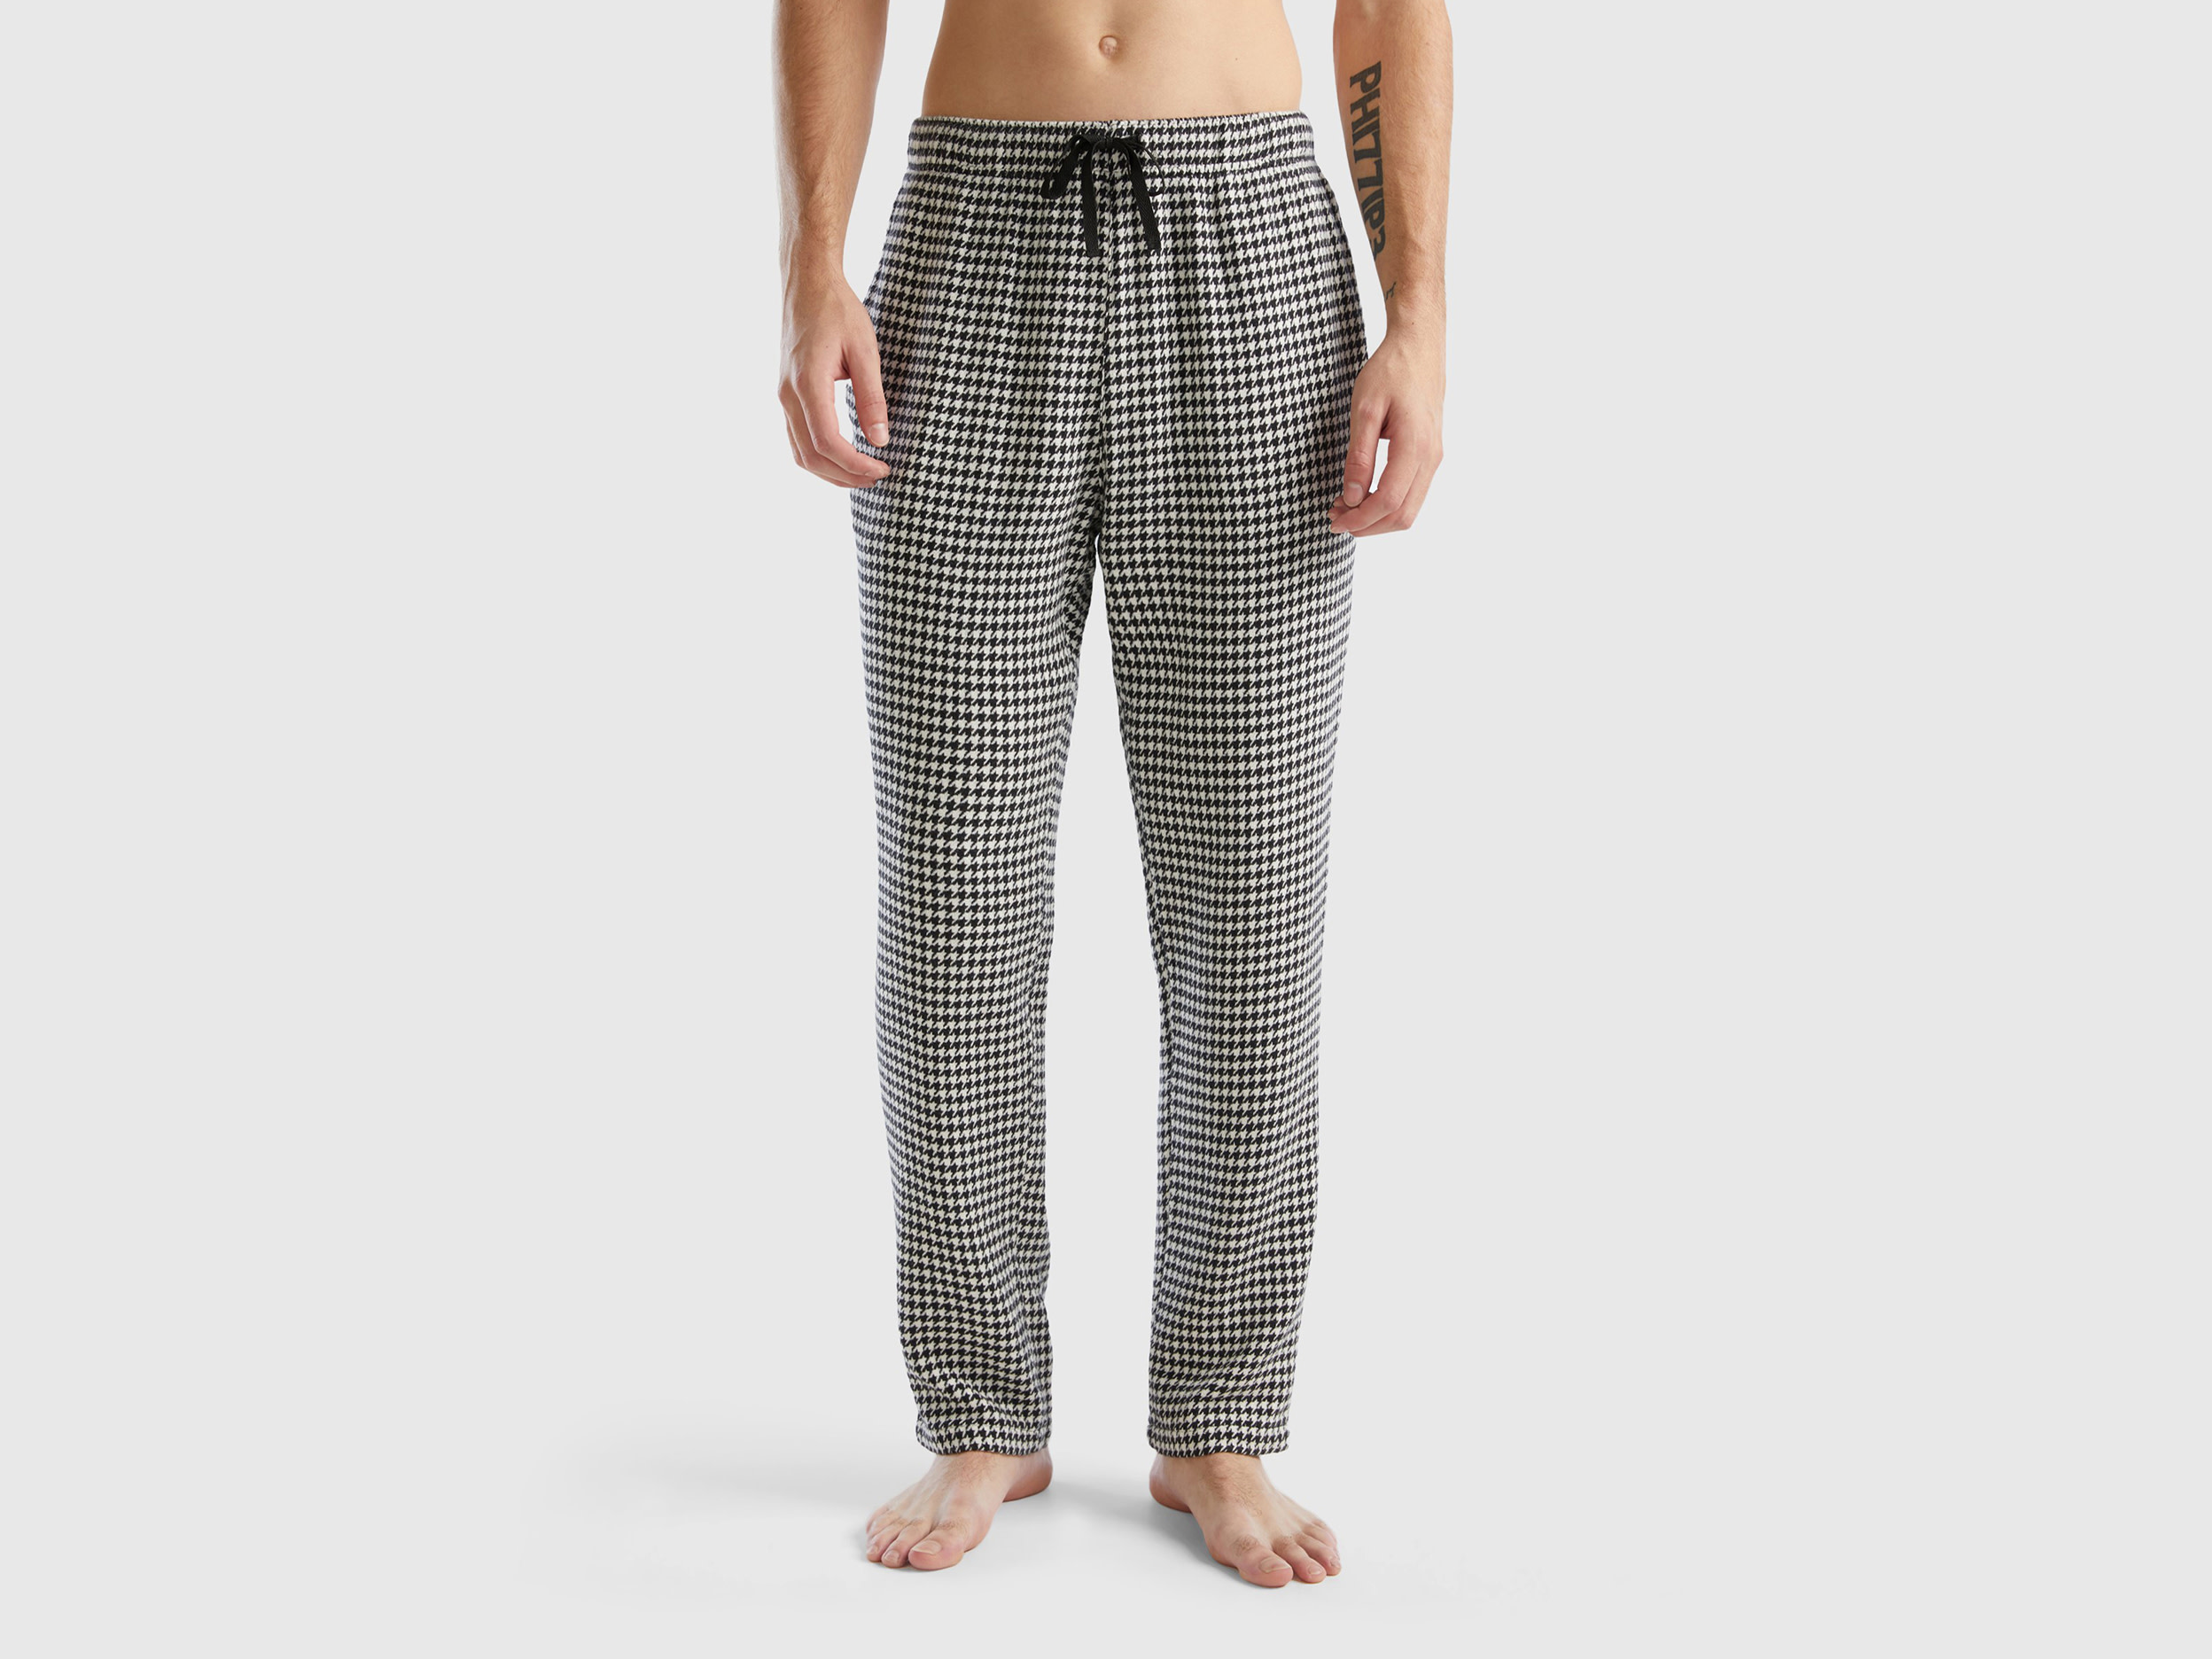 Benetton, Houndstooth Trousers, size XL, Multi-color, Men